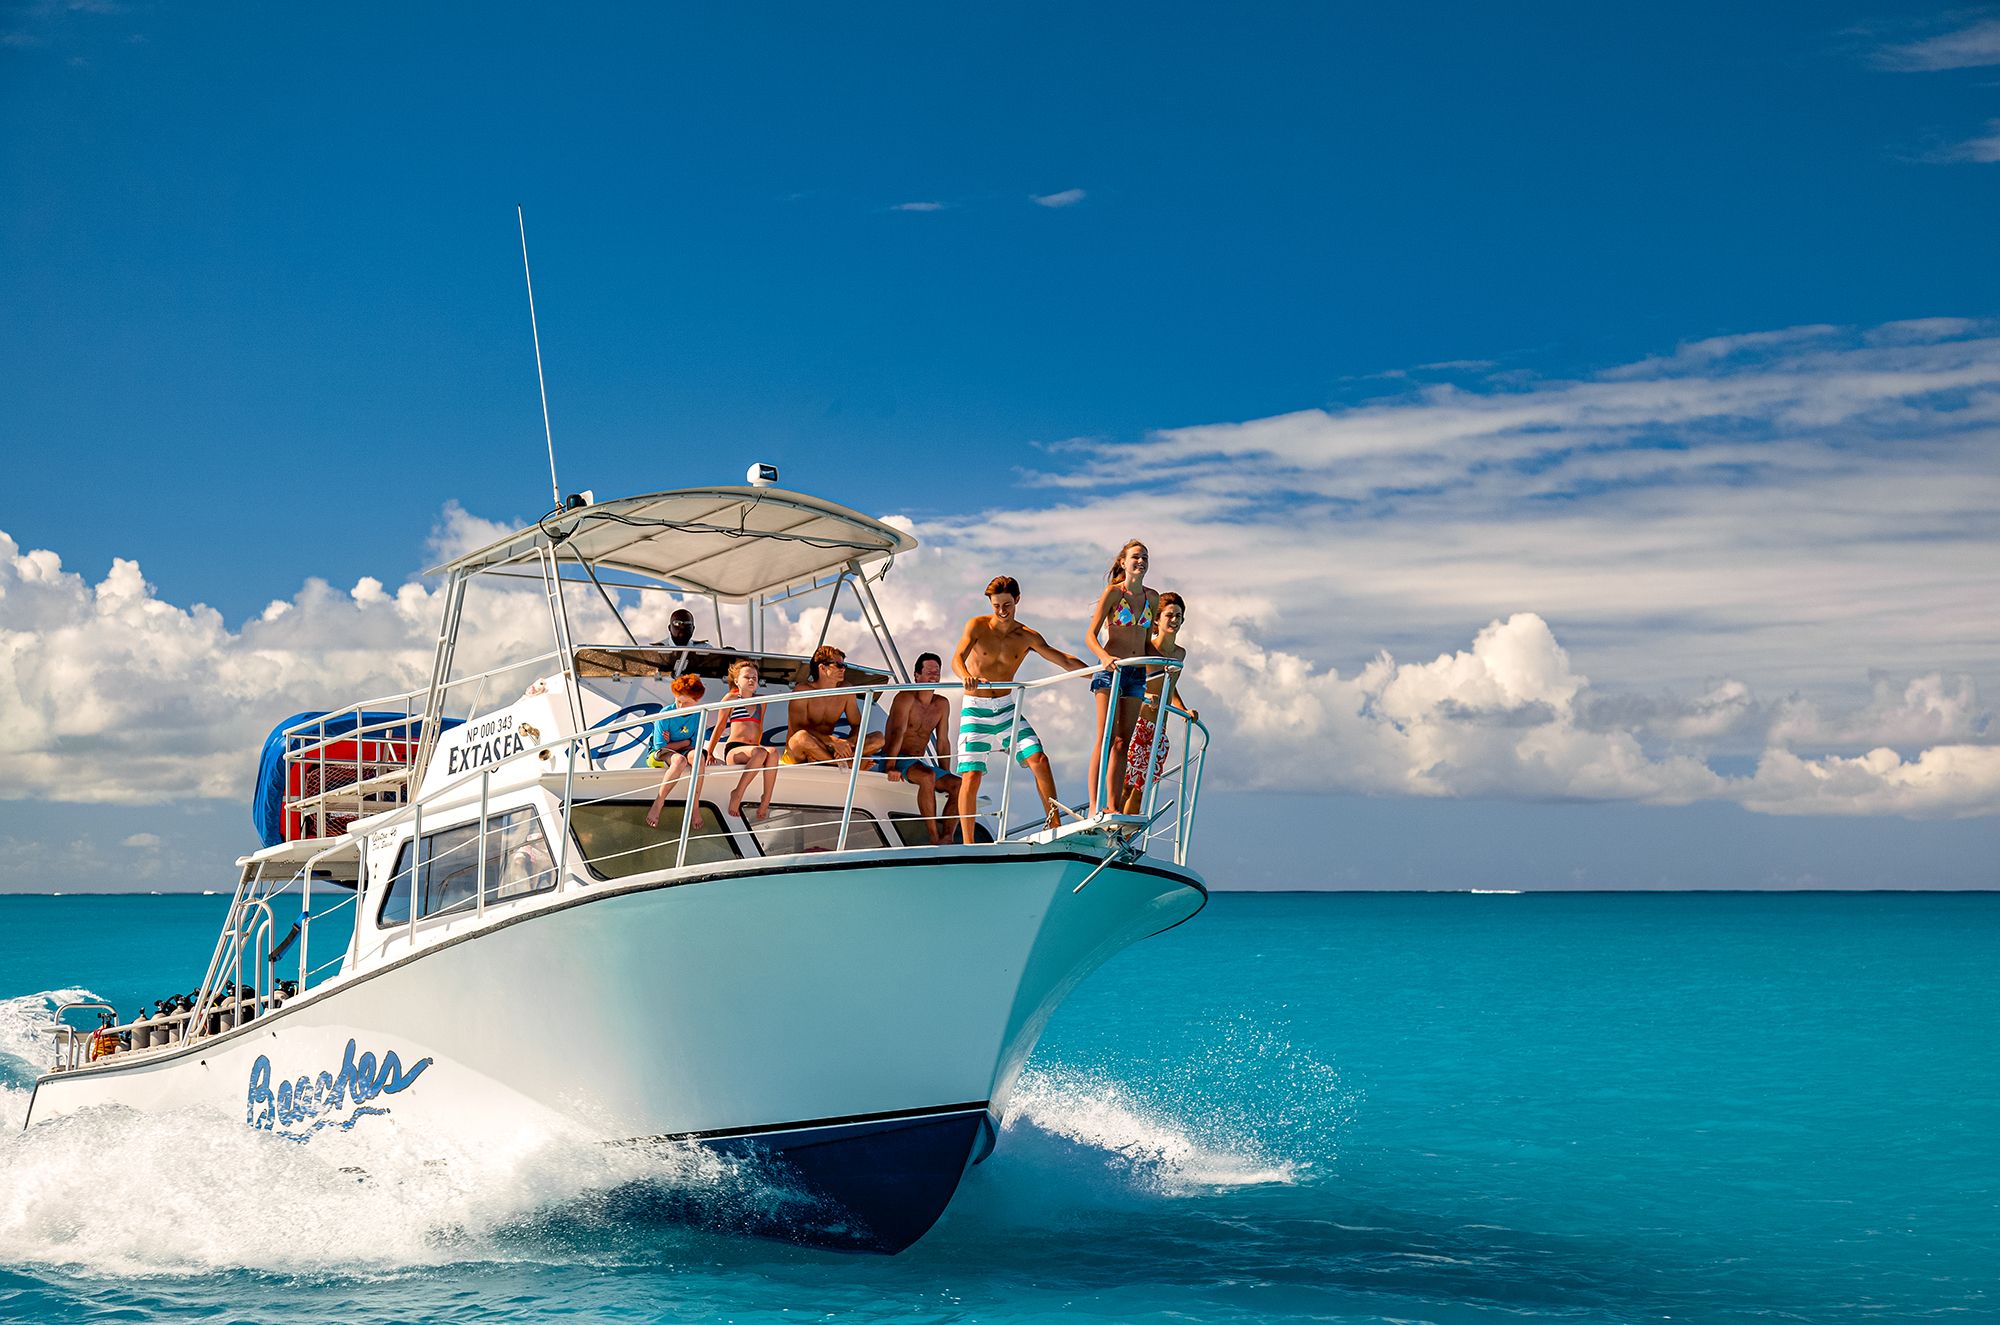 Beaches Turks Caicos Boats Watersports